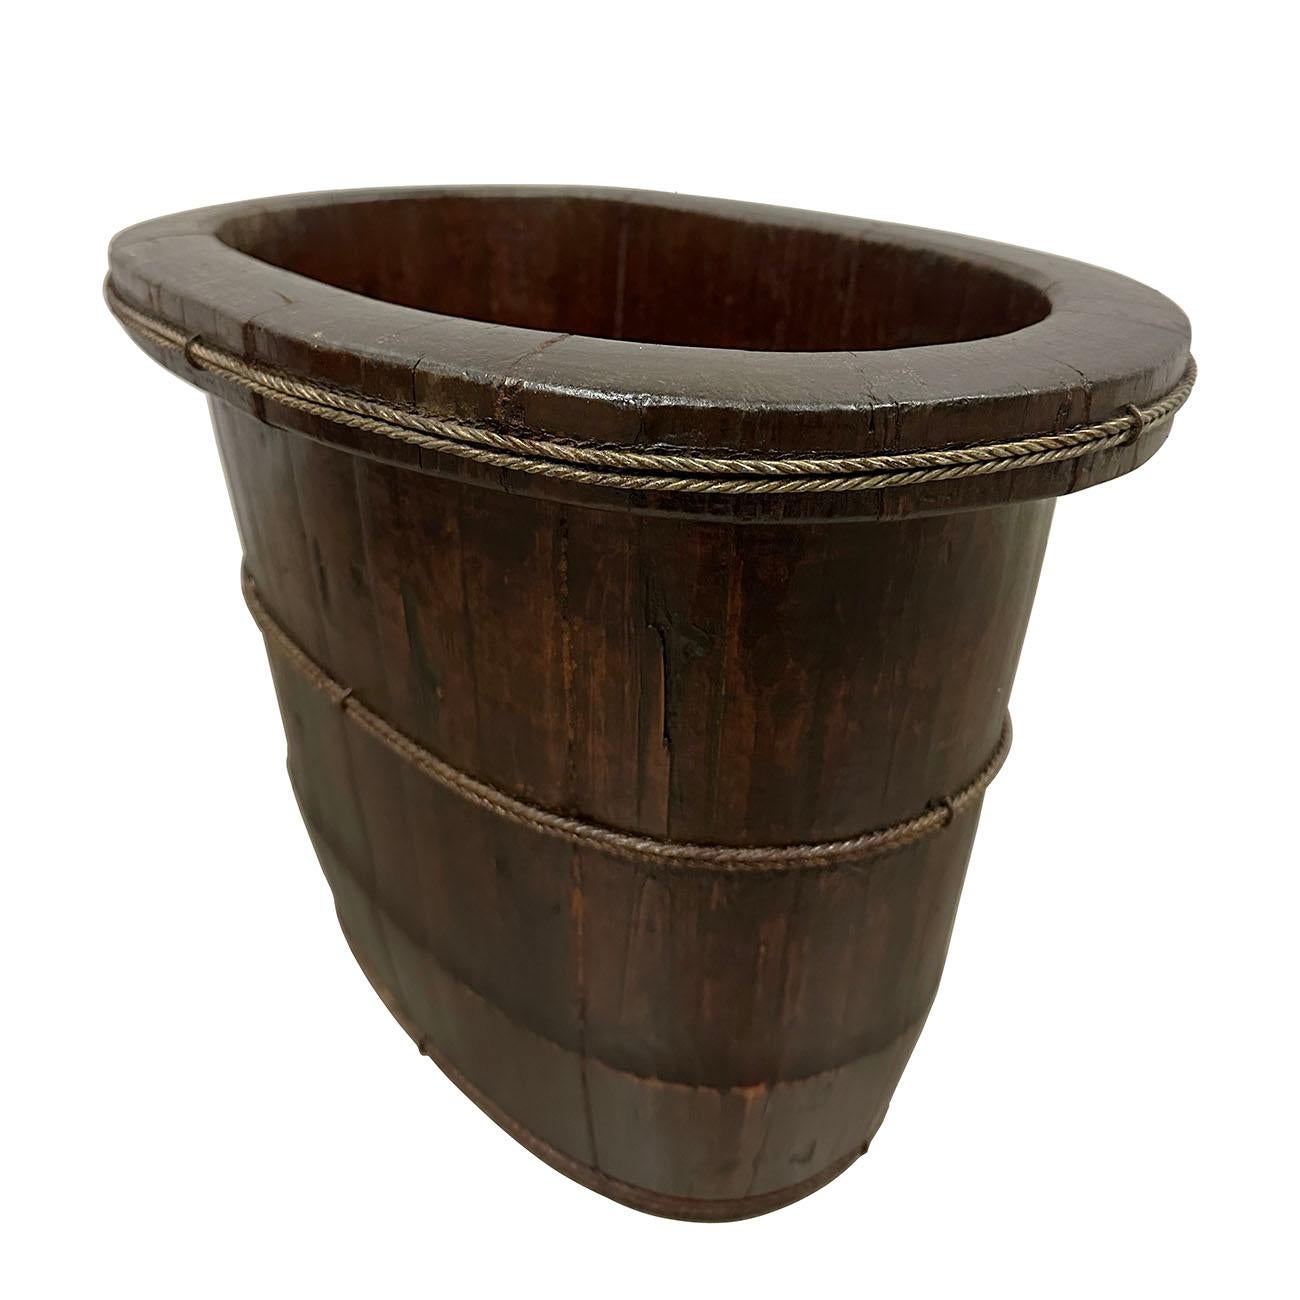 Chinese Export Late 19th Century Chinese Hand Made Wooden Wash/Laundry Basin For Sale